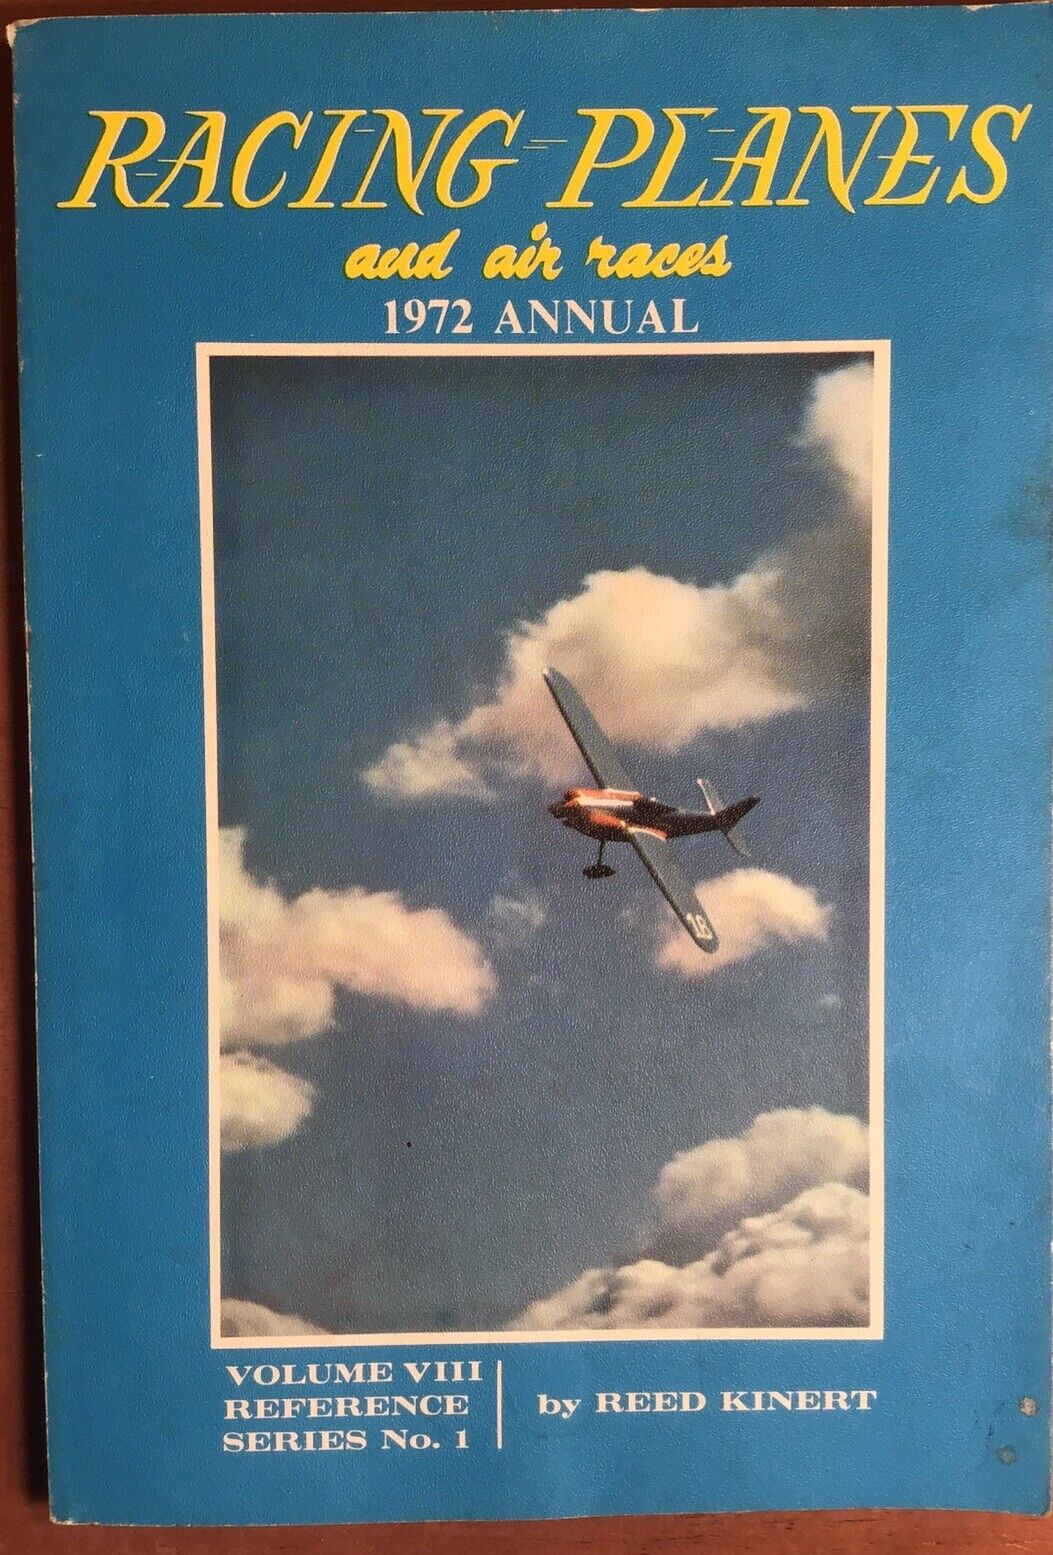 RACING PLANES AND AIR RACES  1972 ANNUAL